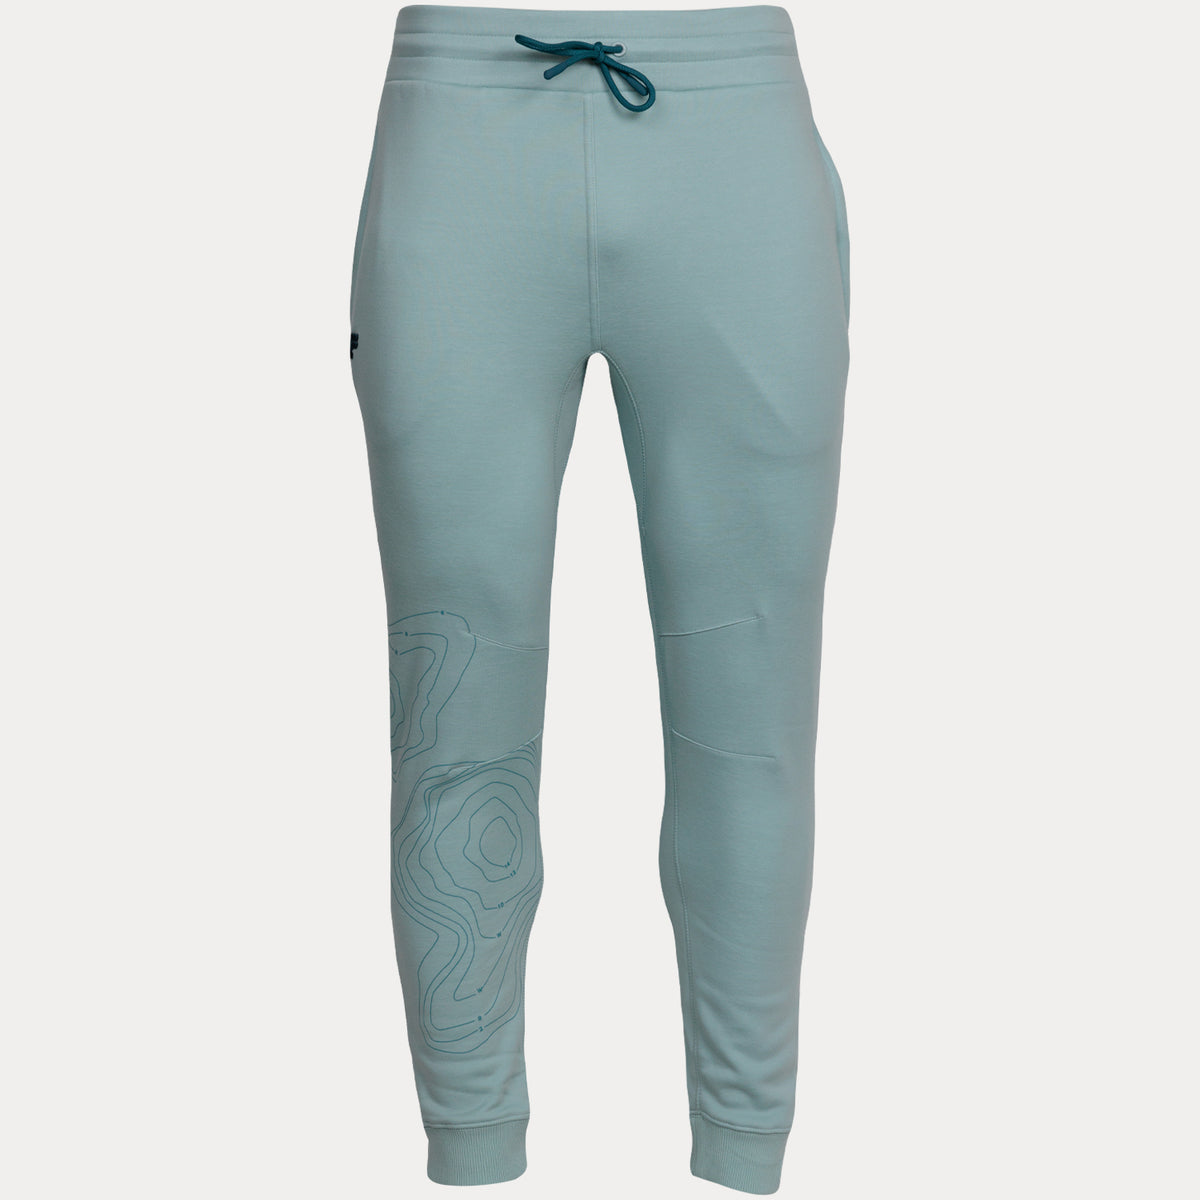 light blue jogger with bathymetric line pattern on right leg